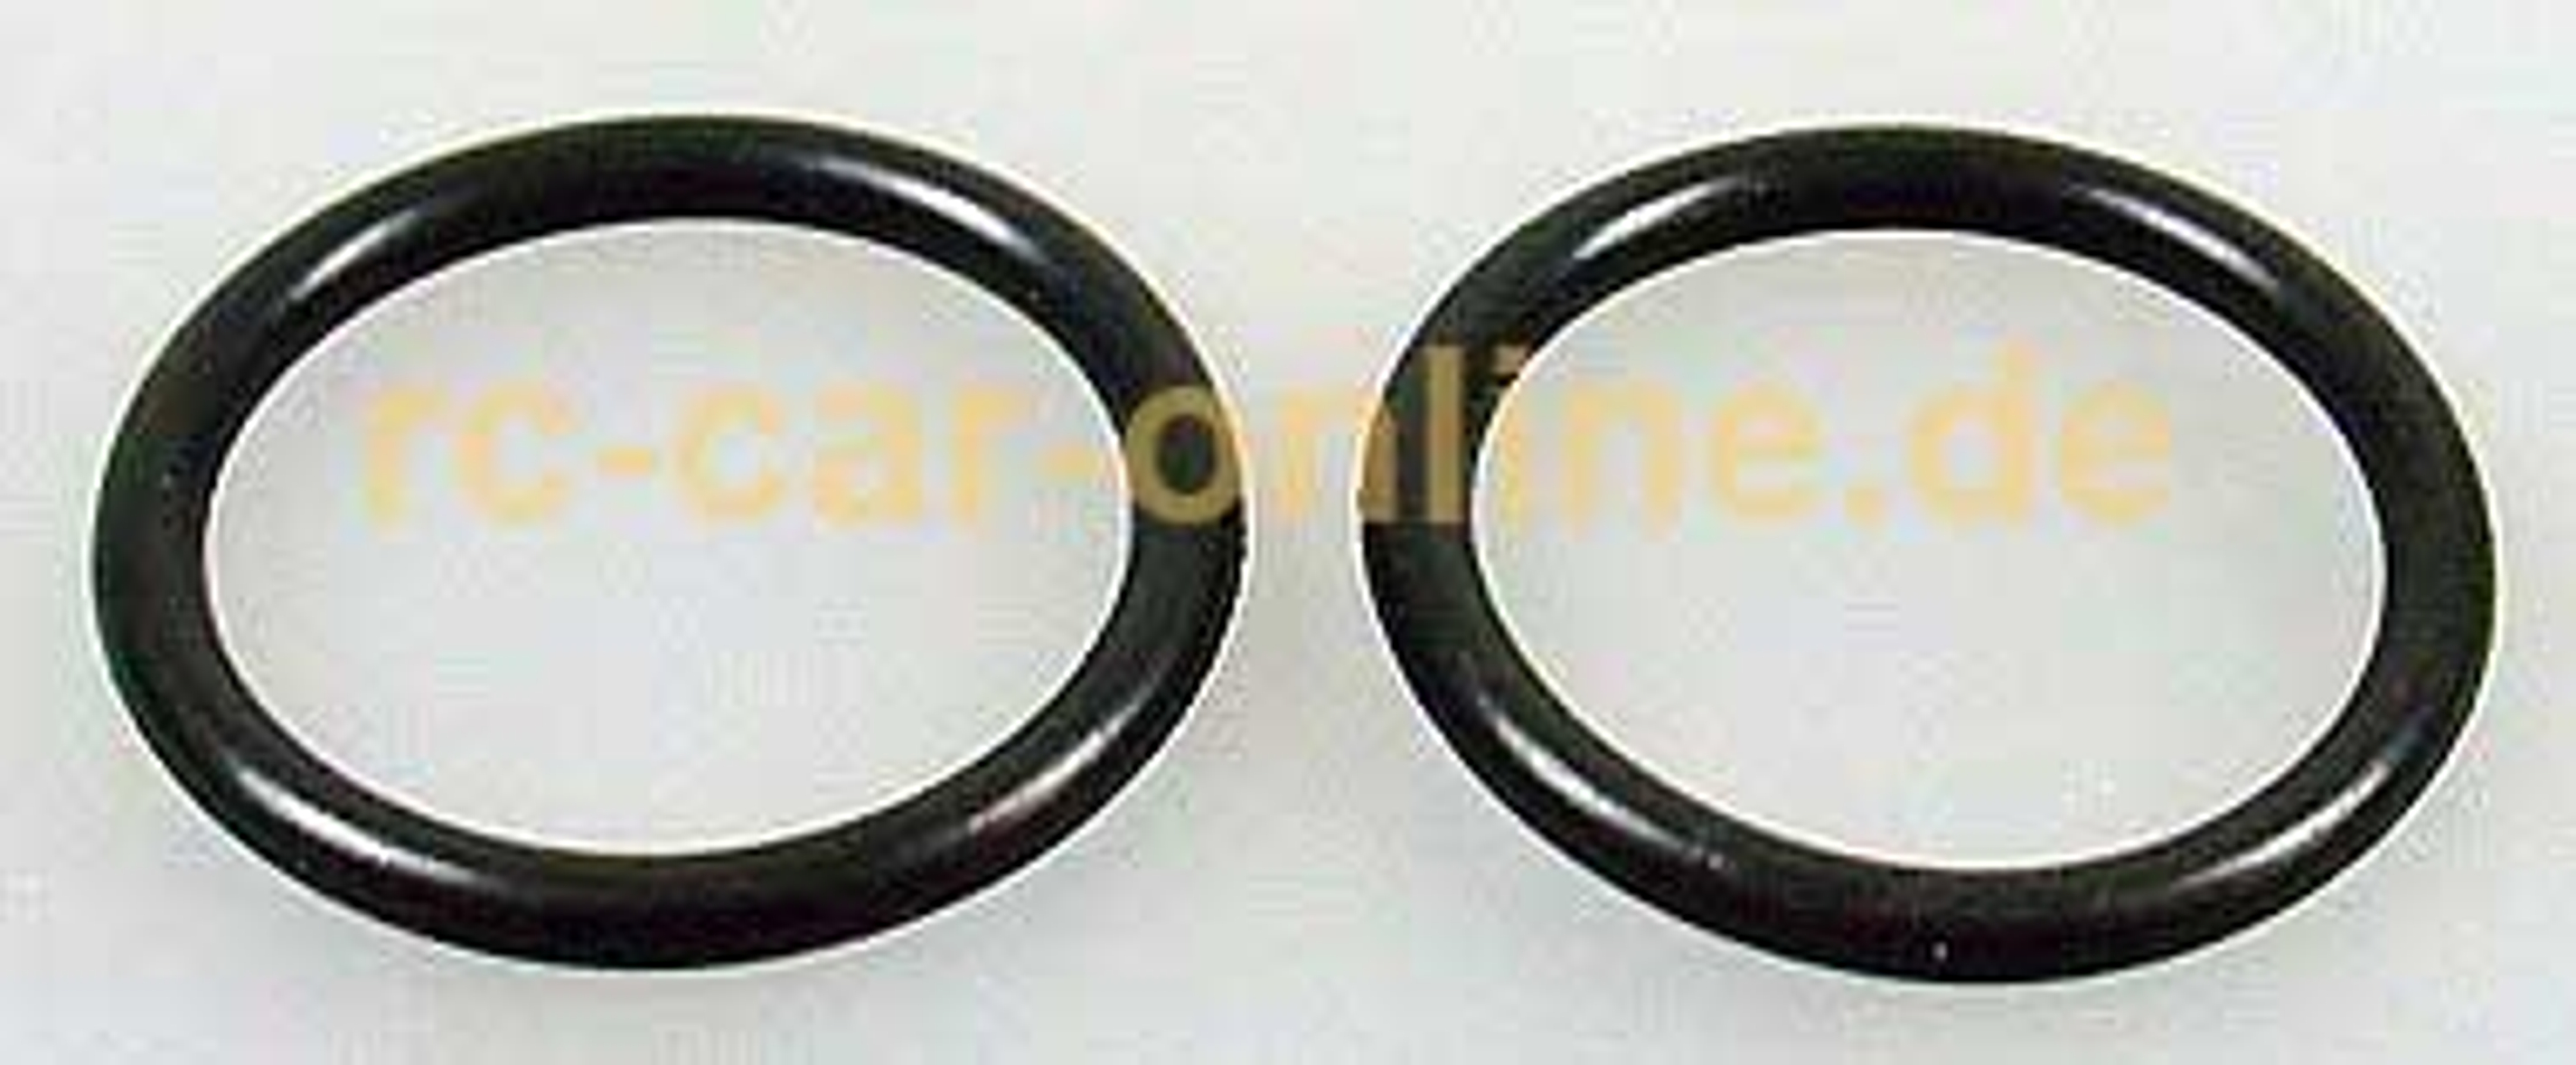 6290/03 FG Gasket set for tuning pipe Leopard